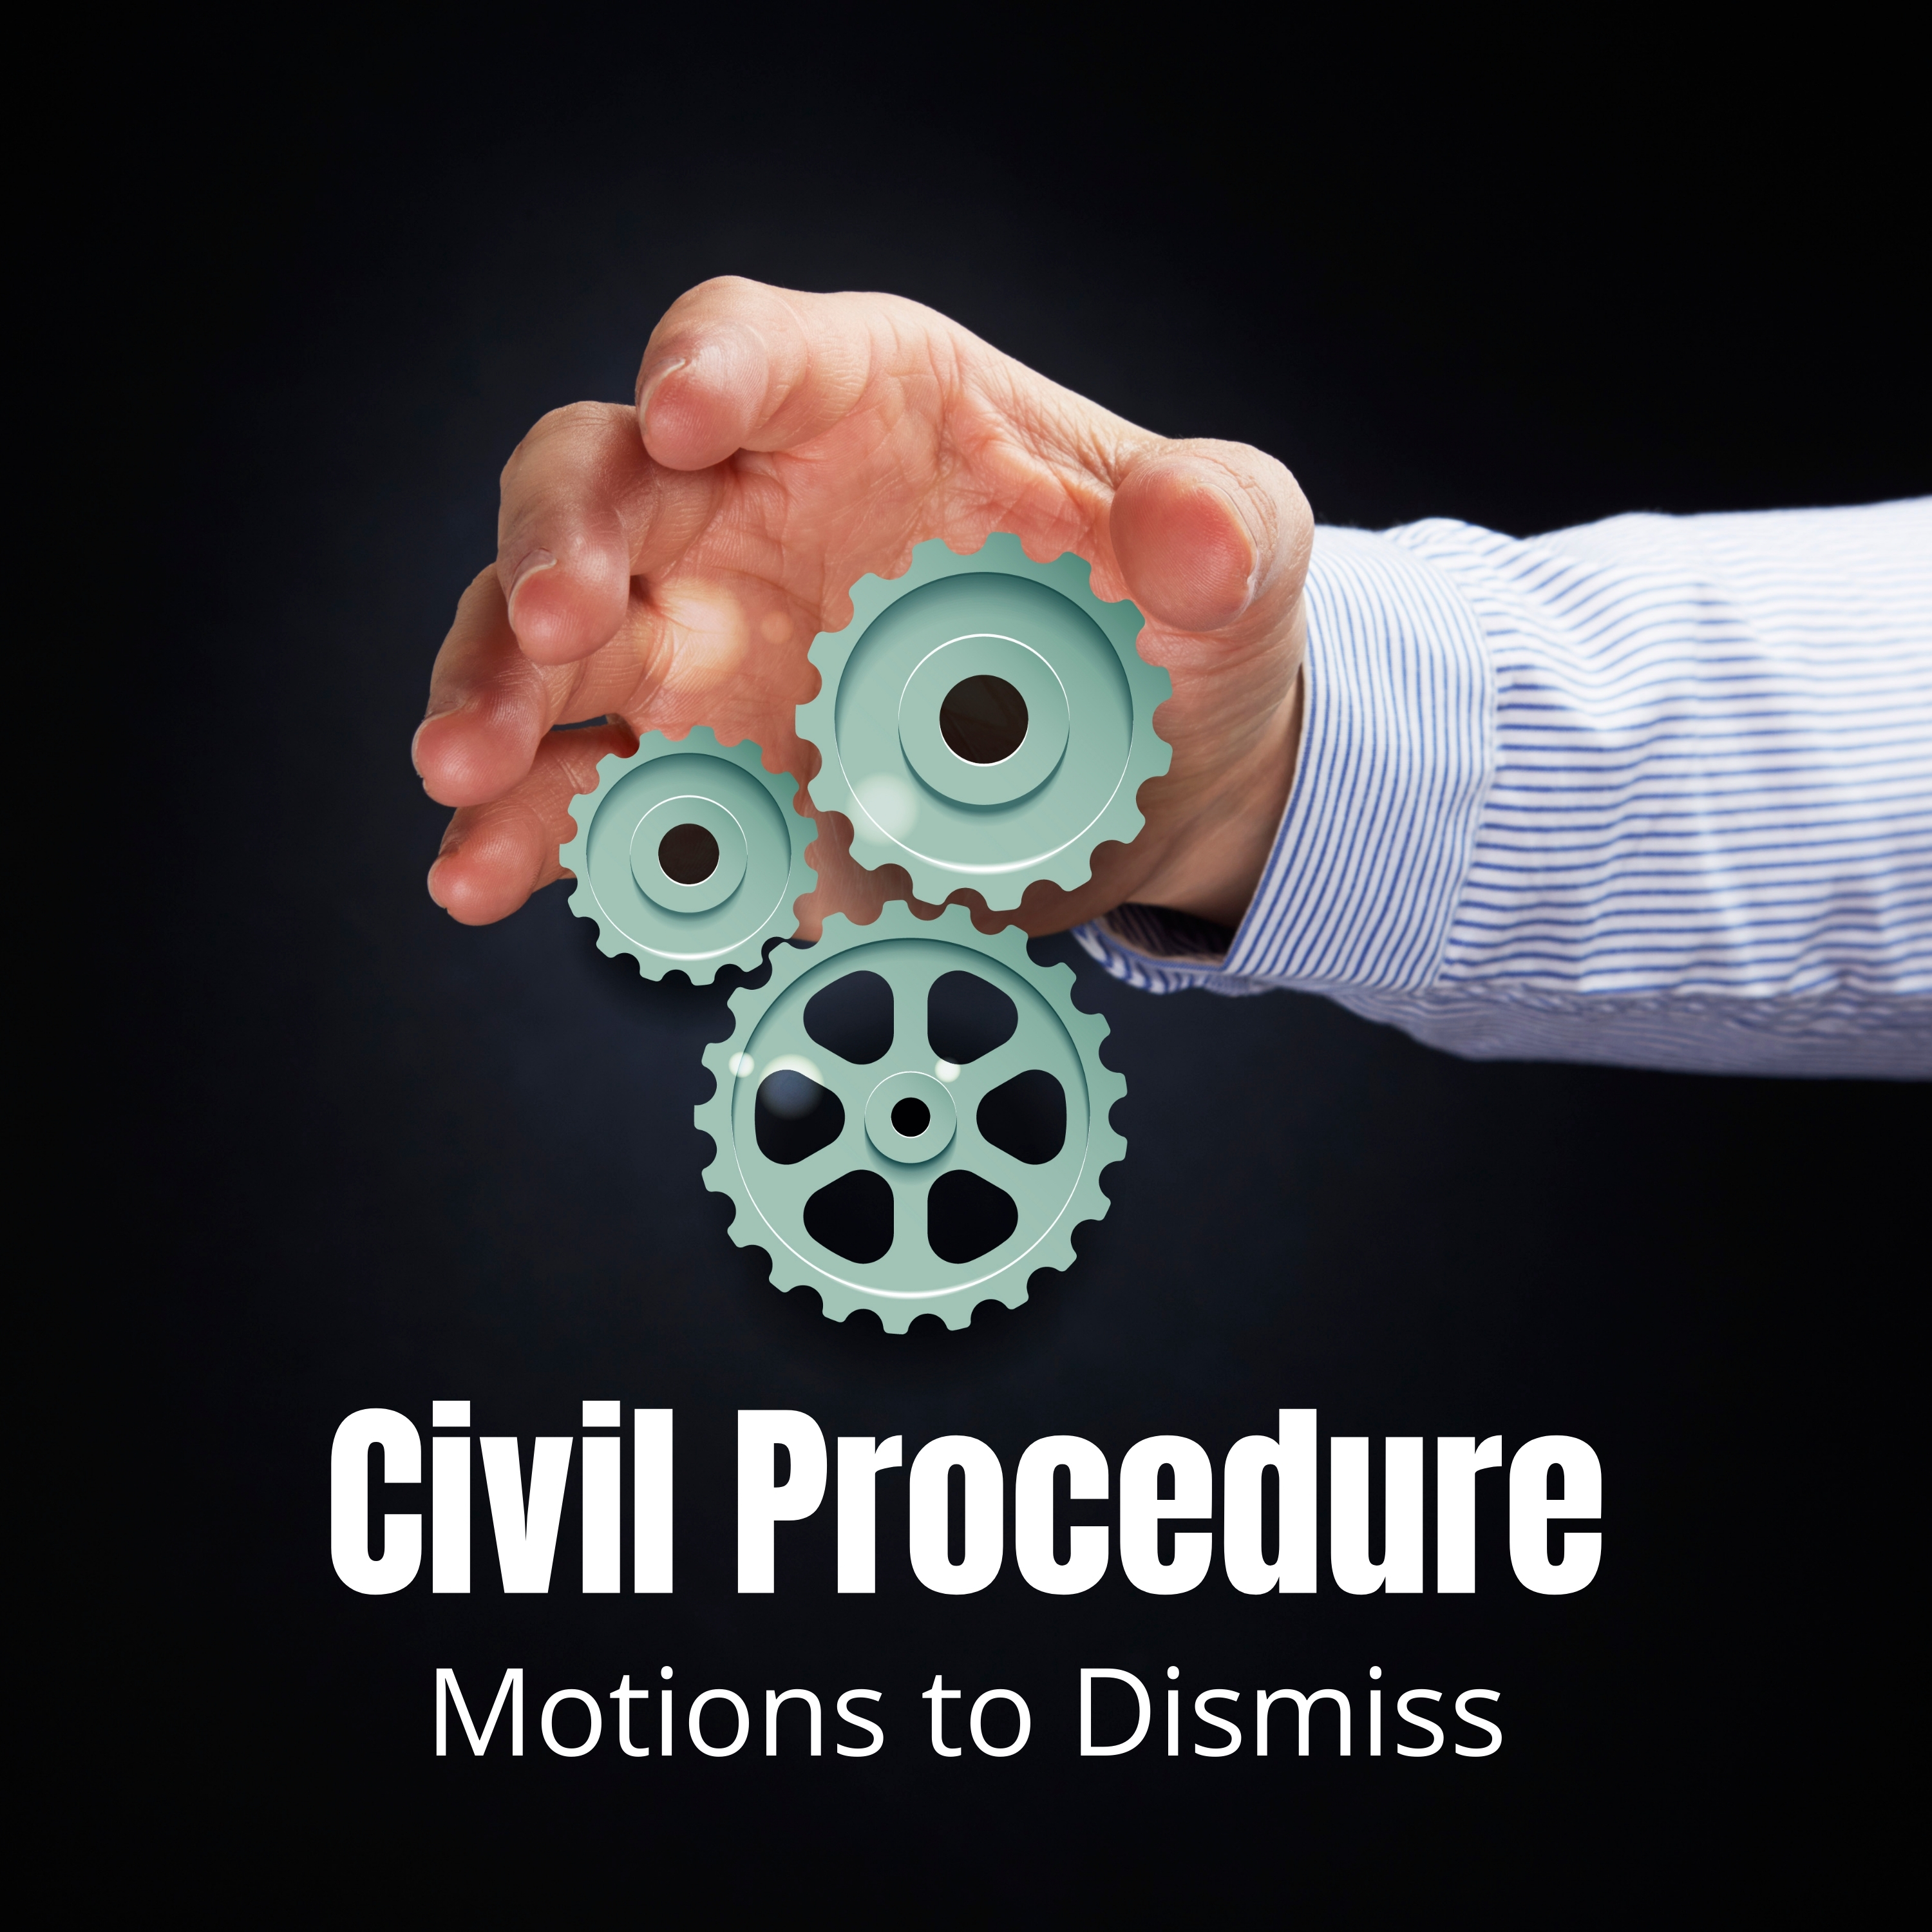 Civil Procedure - Lecture 3 - Motions to Dismiss and Waiver under Federal Rule 12